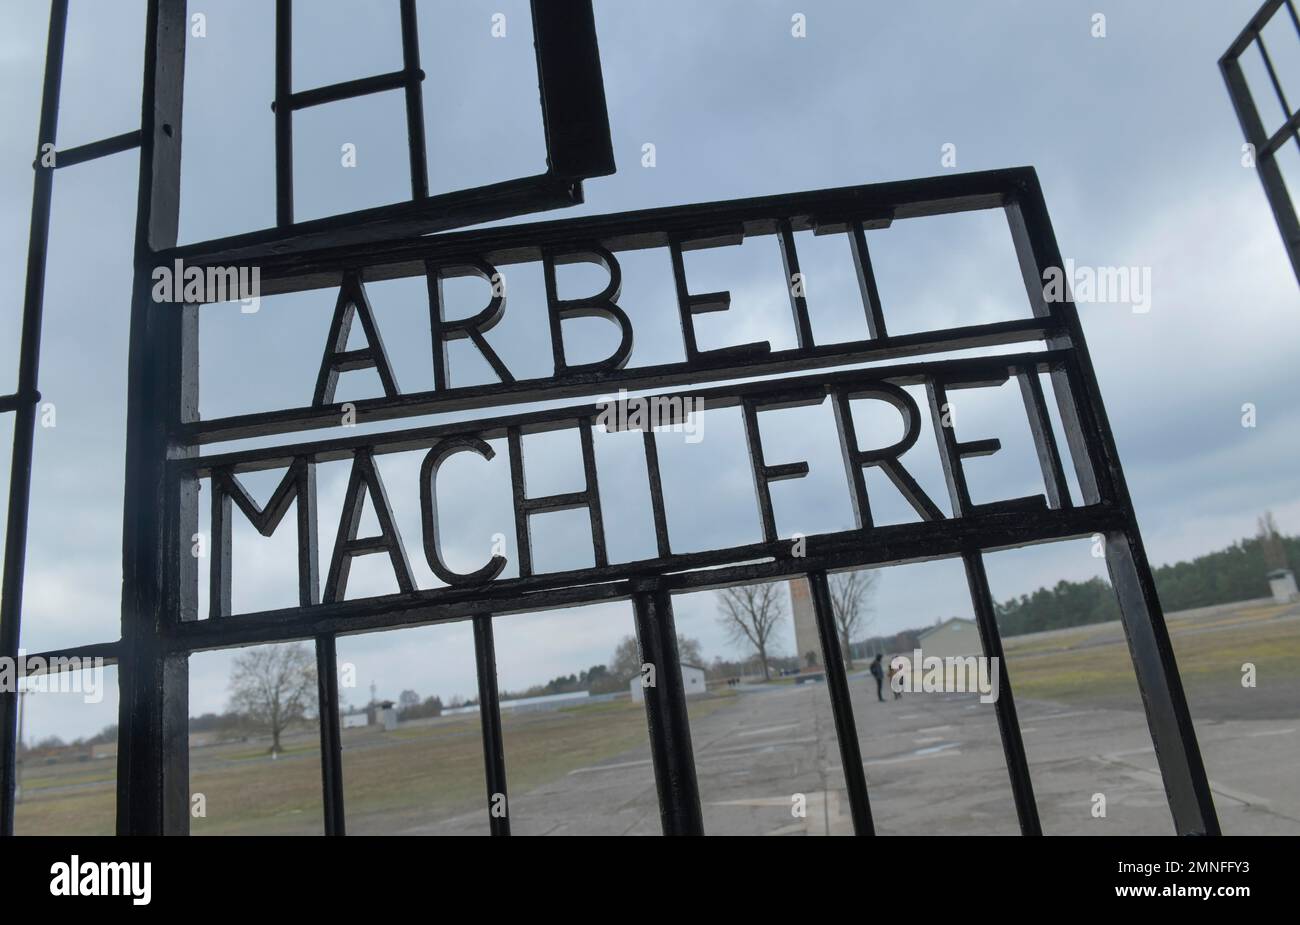 Lettering Arbeit macht frei (Work sets you free) in the entrance building to the prisoners' camp Tower A, Sachsenhausen Concentration Camp Memorial Stock Photo